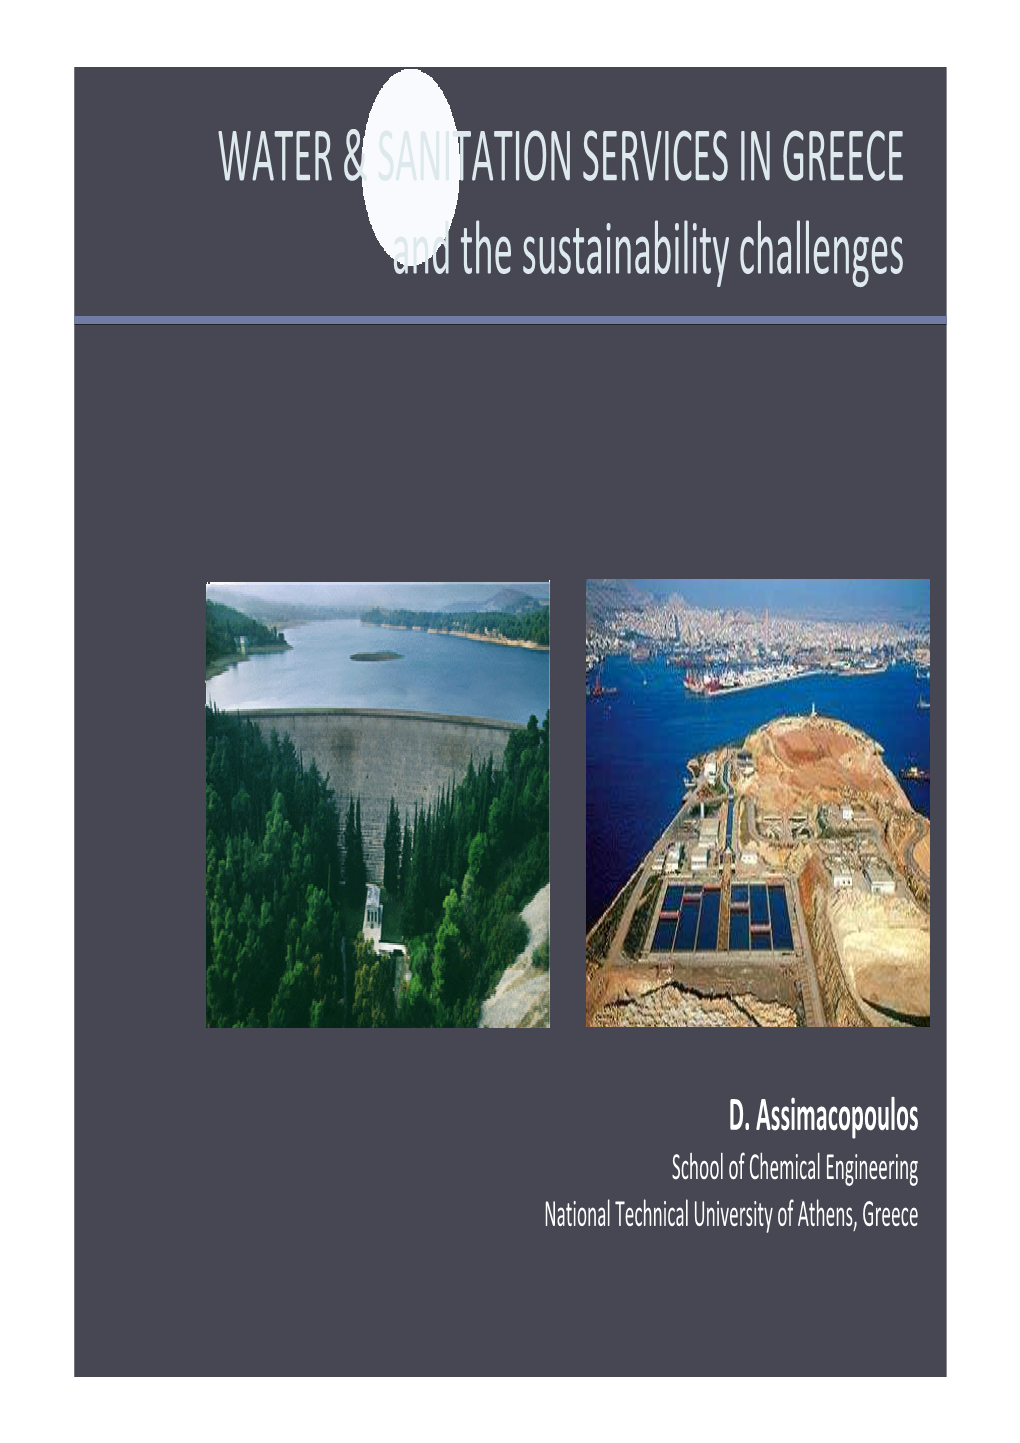 WATER & SANITATION SERVICES in GREECE and the Sustainability